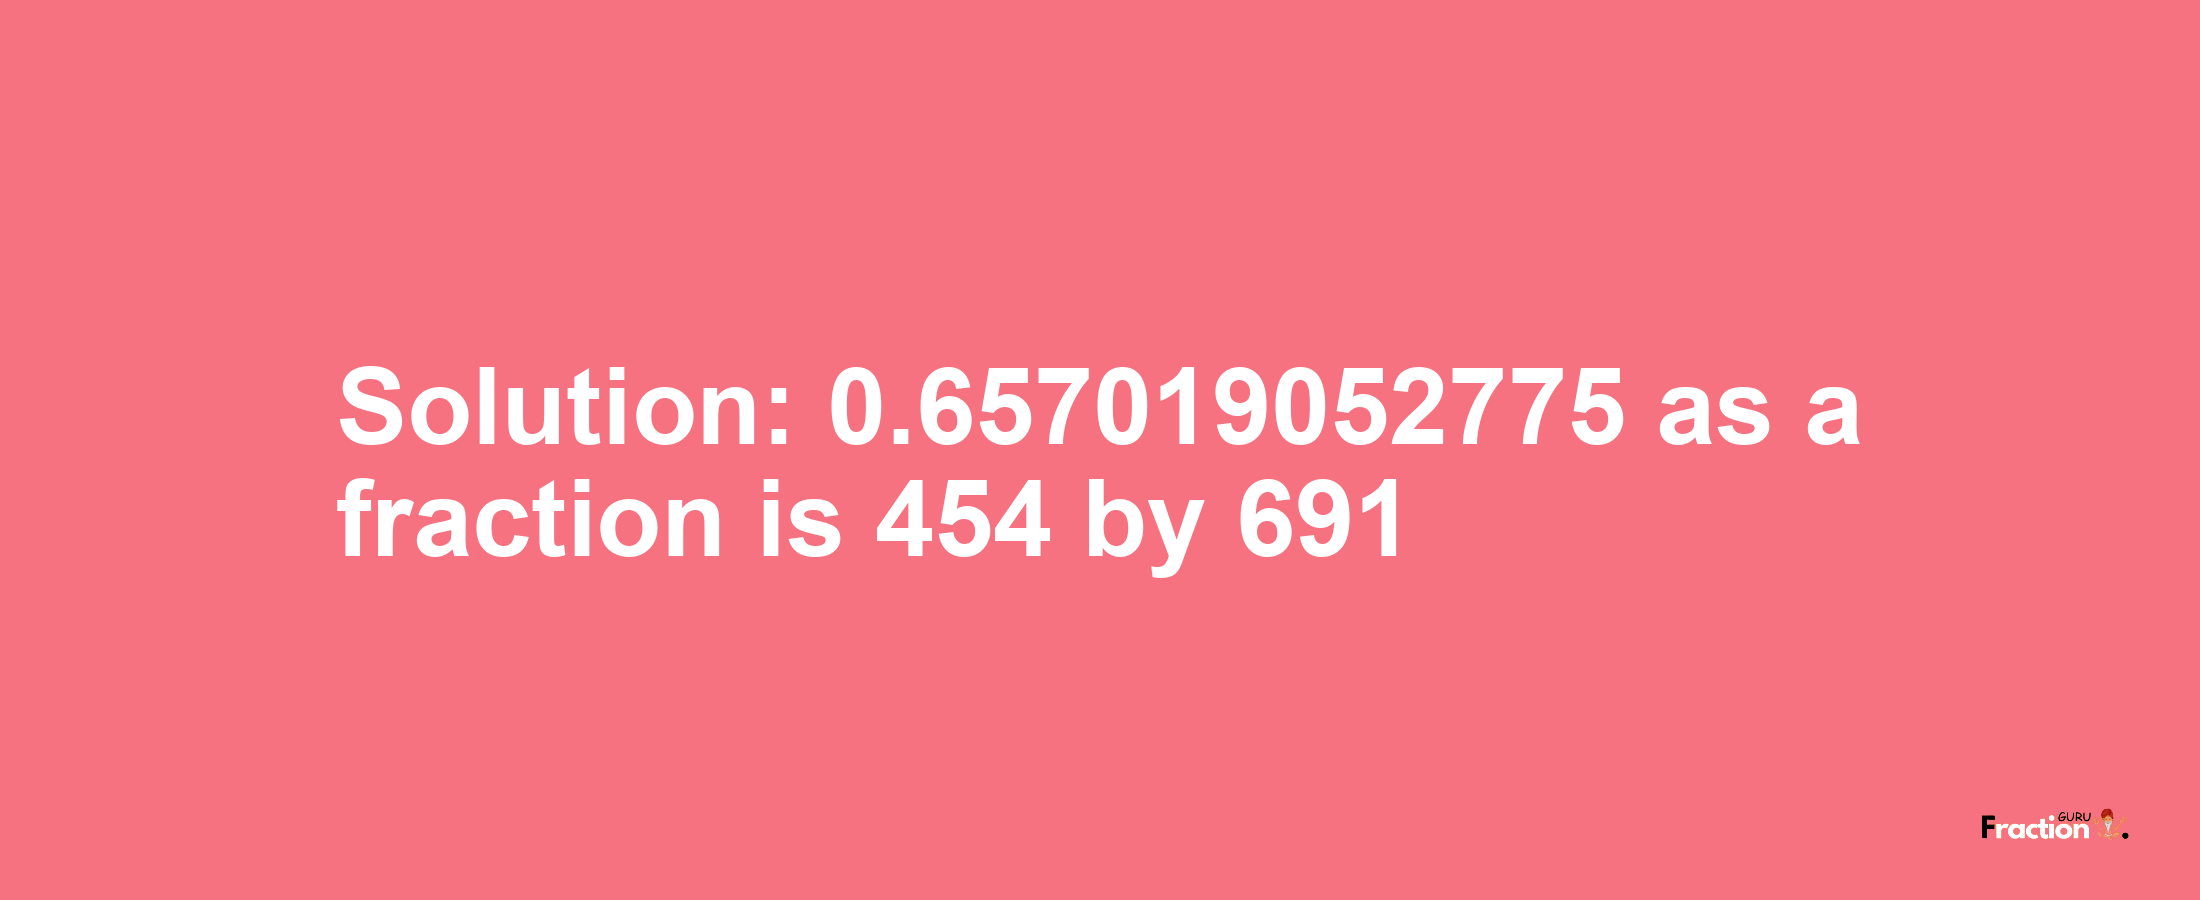 Solution:0.657019052775 as a fraction is 454/691